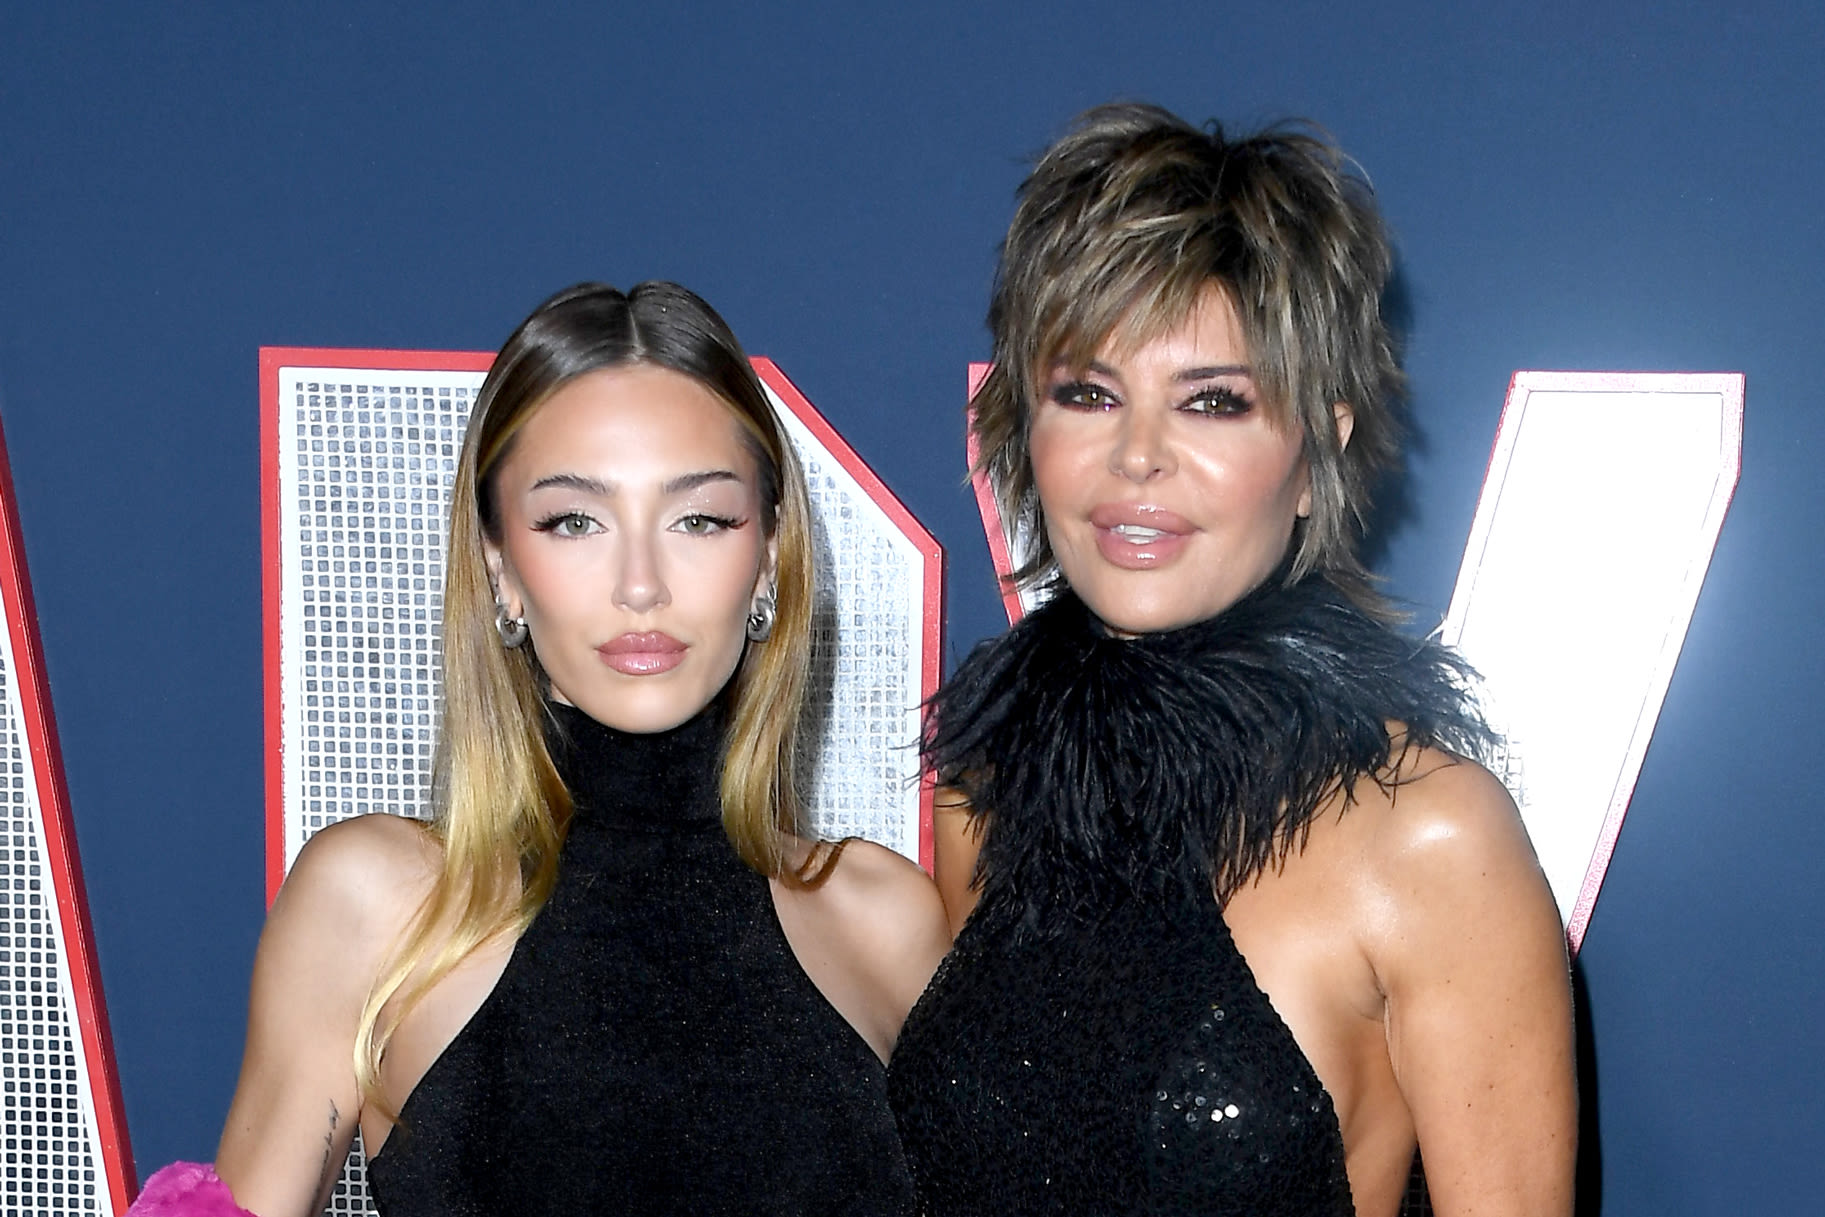 Lisa Rinna Describes Working with Daughter Delilah "On Set” in Their New Project (EXCLUSIVE) | Bravo TV Official Site